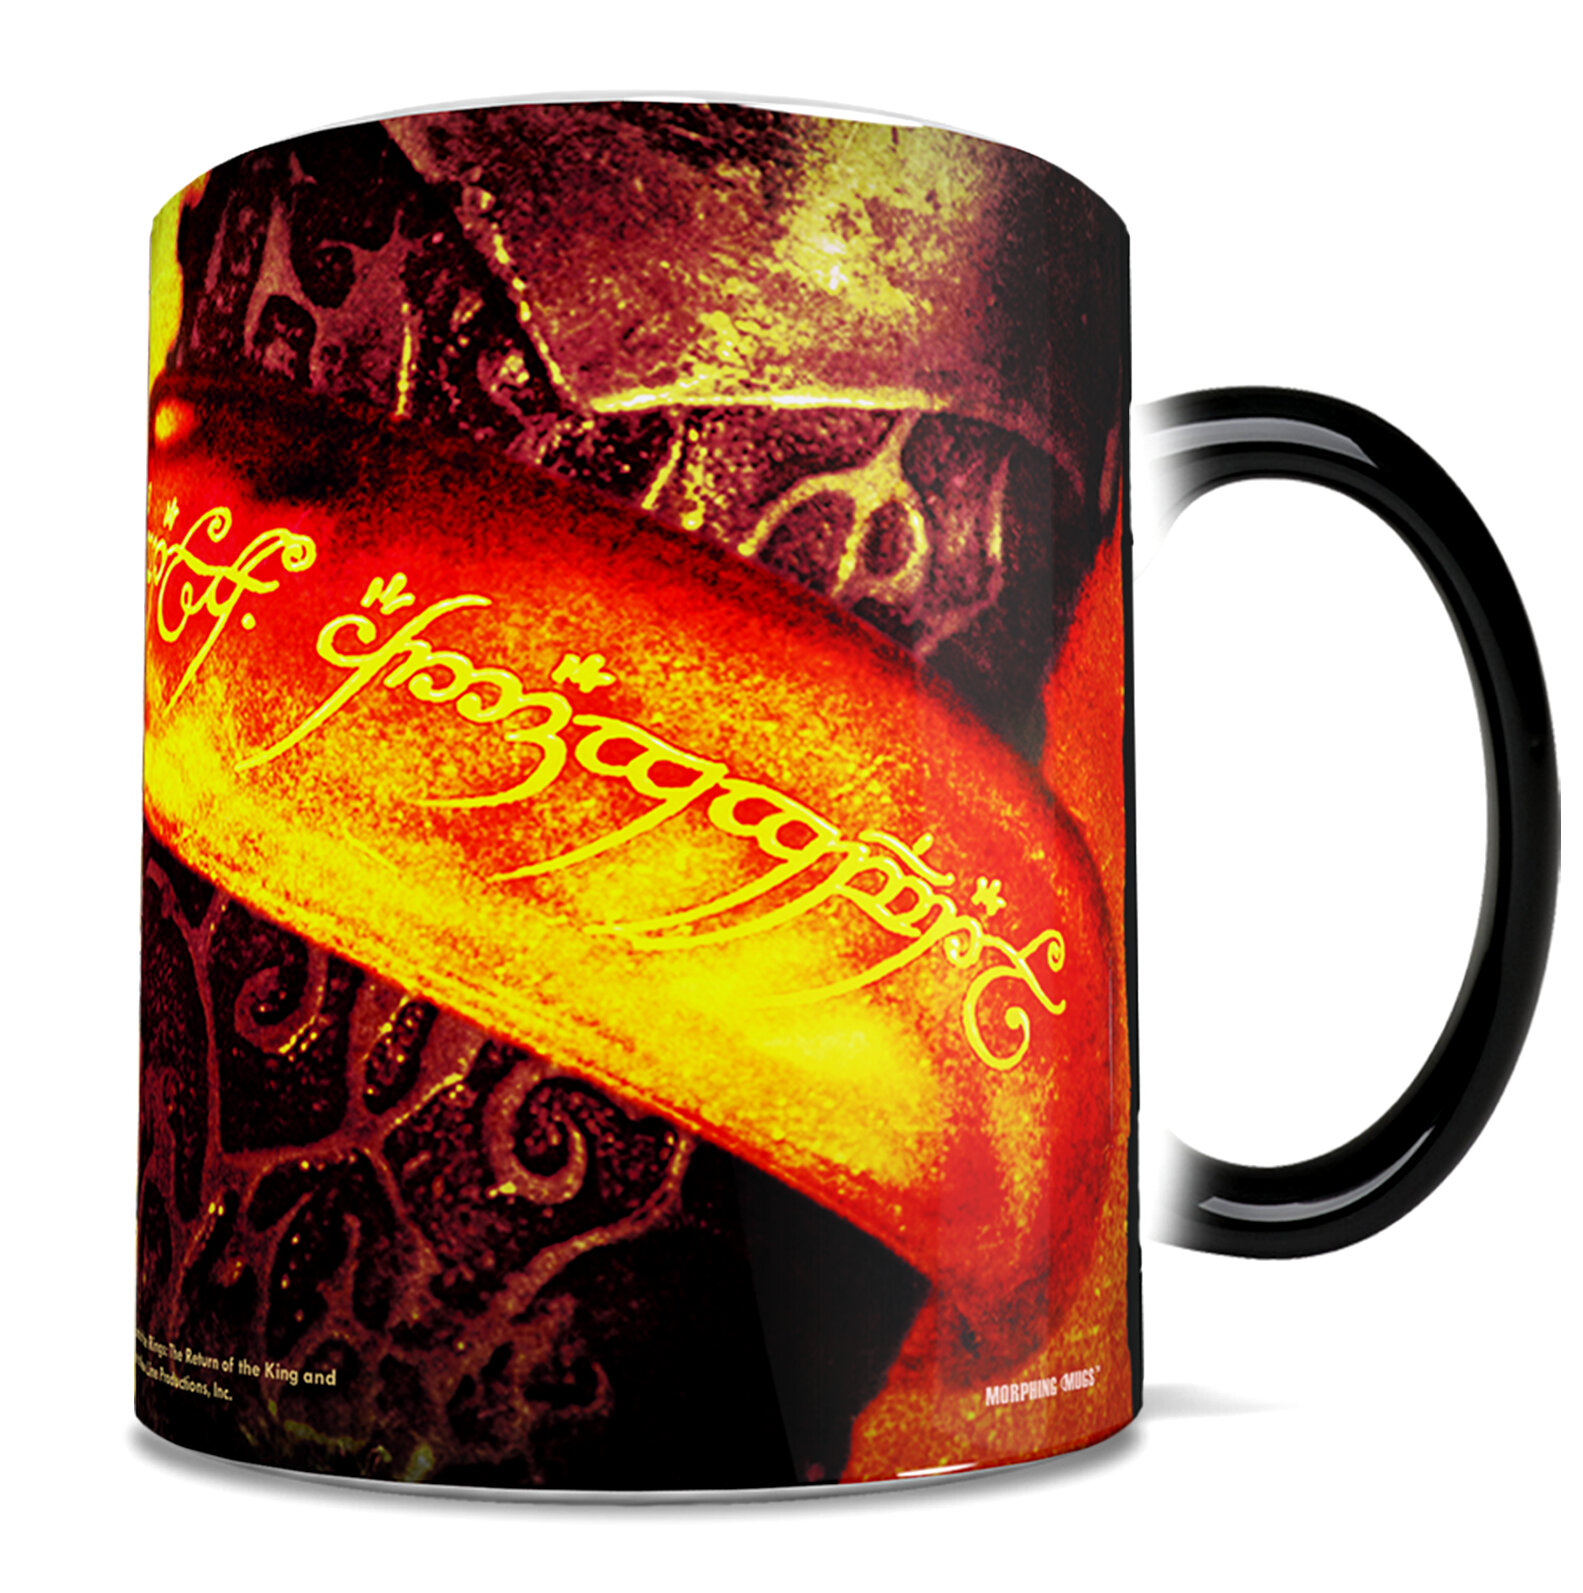 The Lord of the Rings (The One Ring) Morphing Mugs Heat-Sensitive Clue Mug